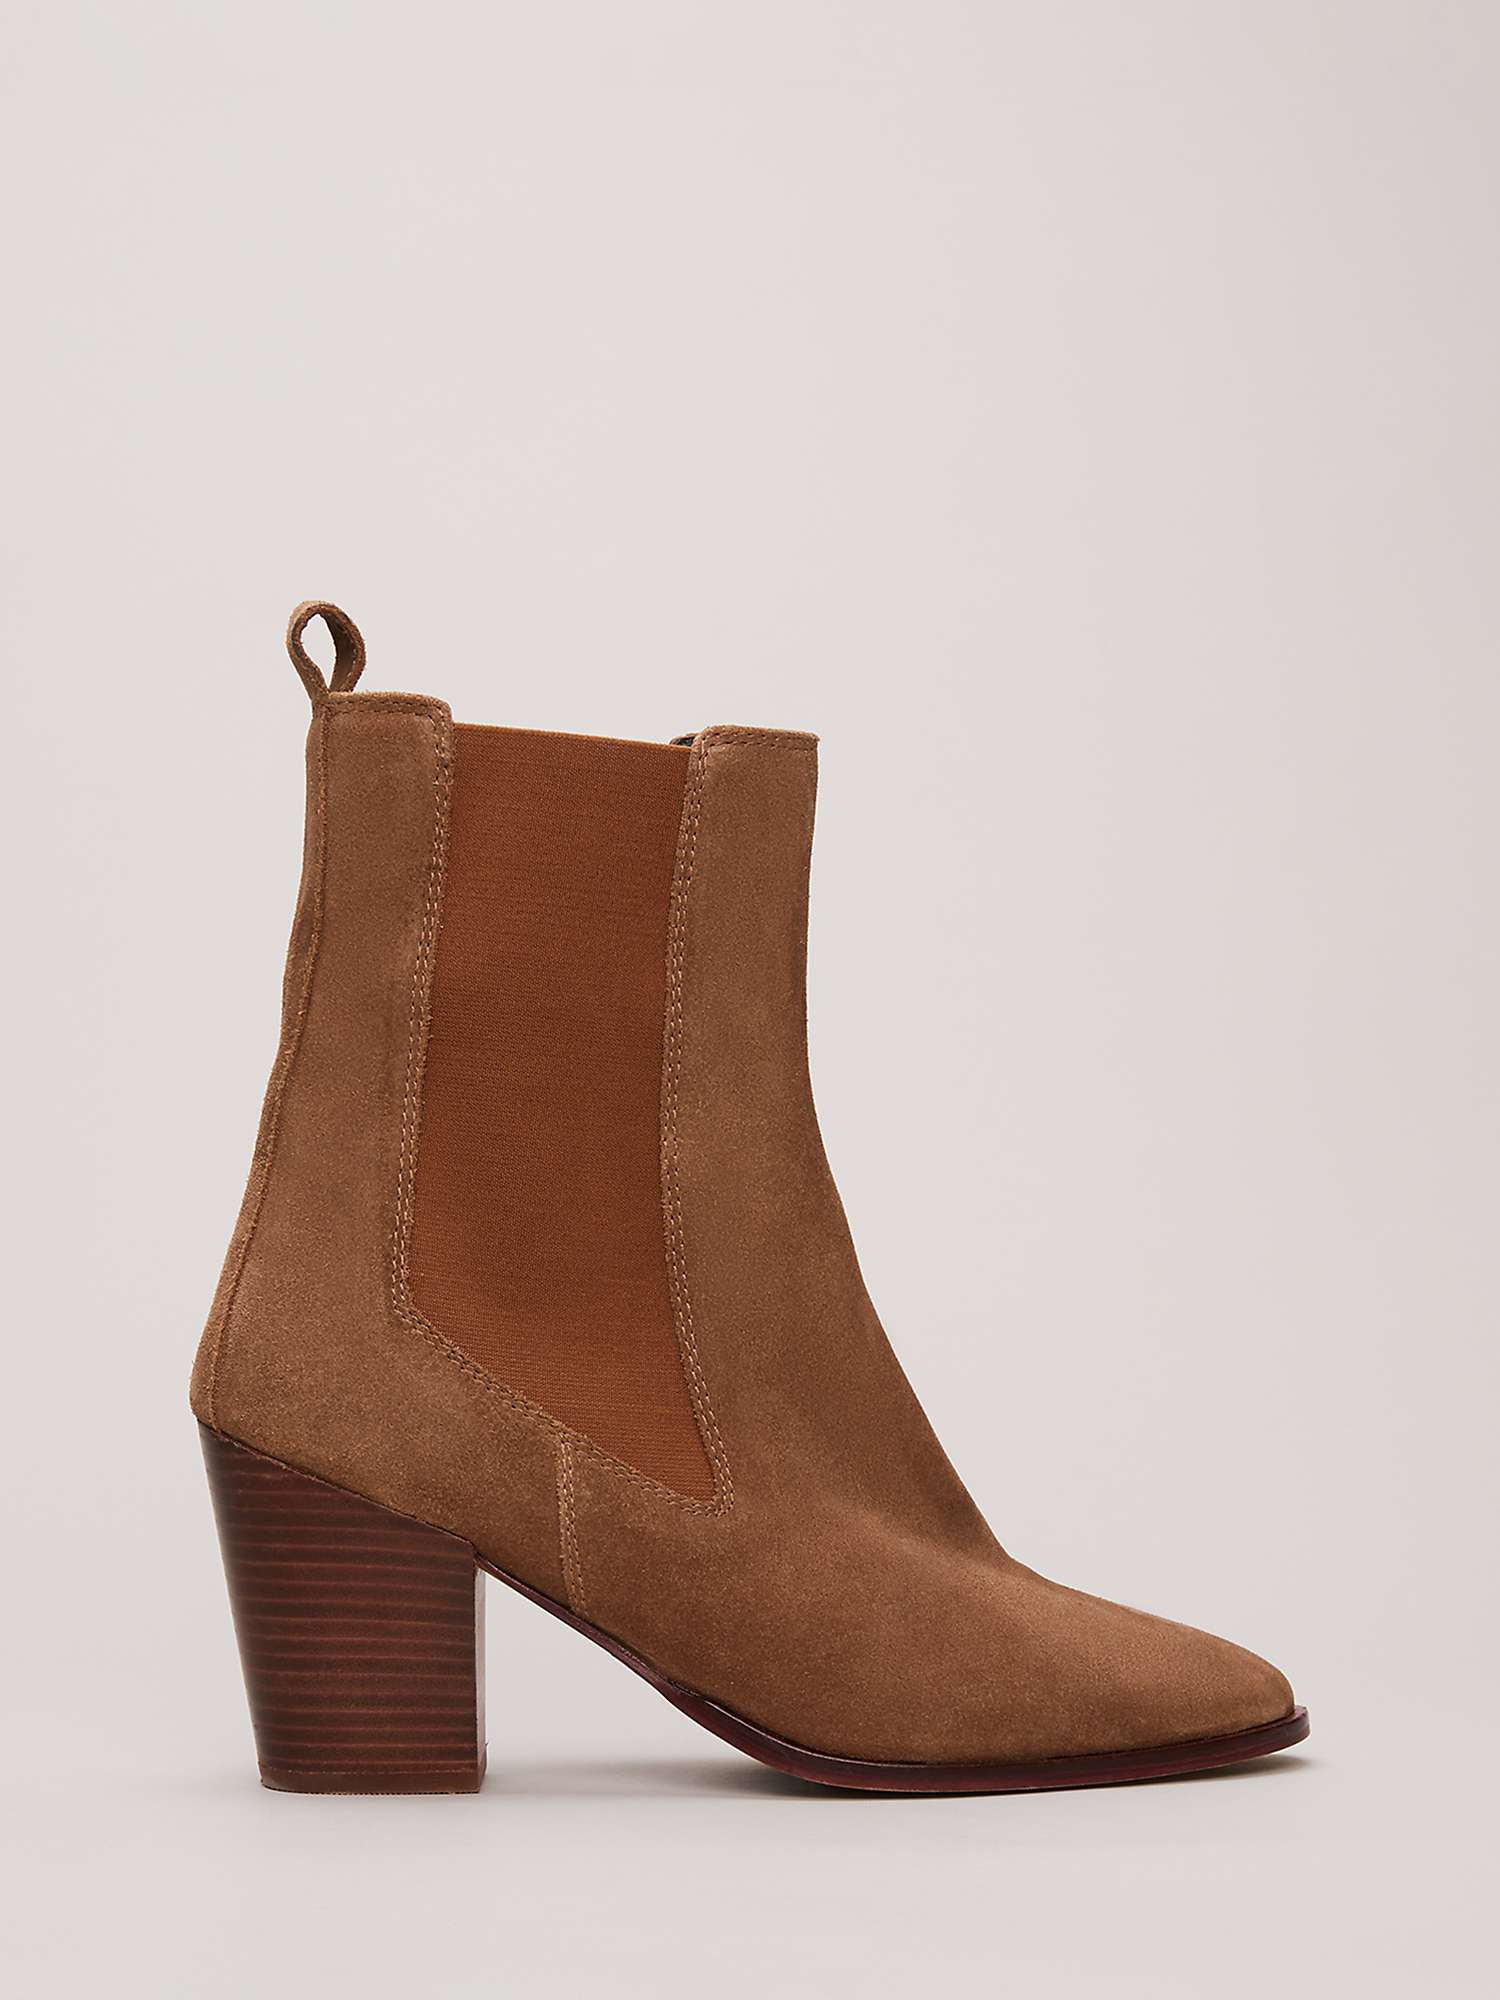 Buy Phase Eight Suede Cowboy Boots, Tan Online at johnlewis.com